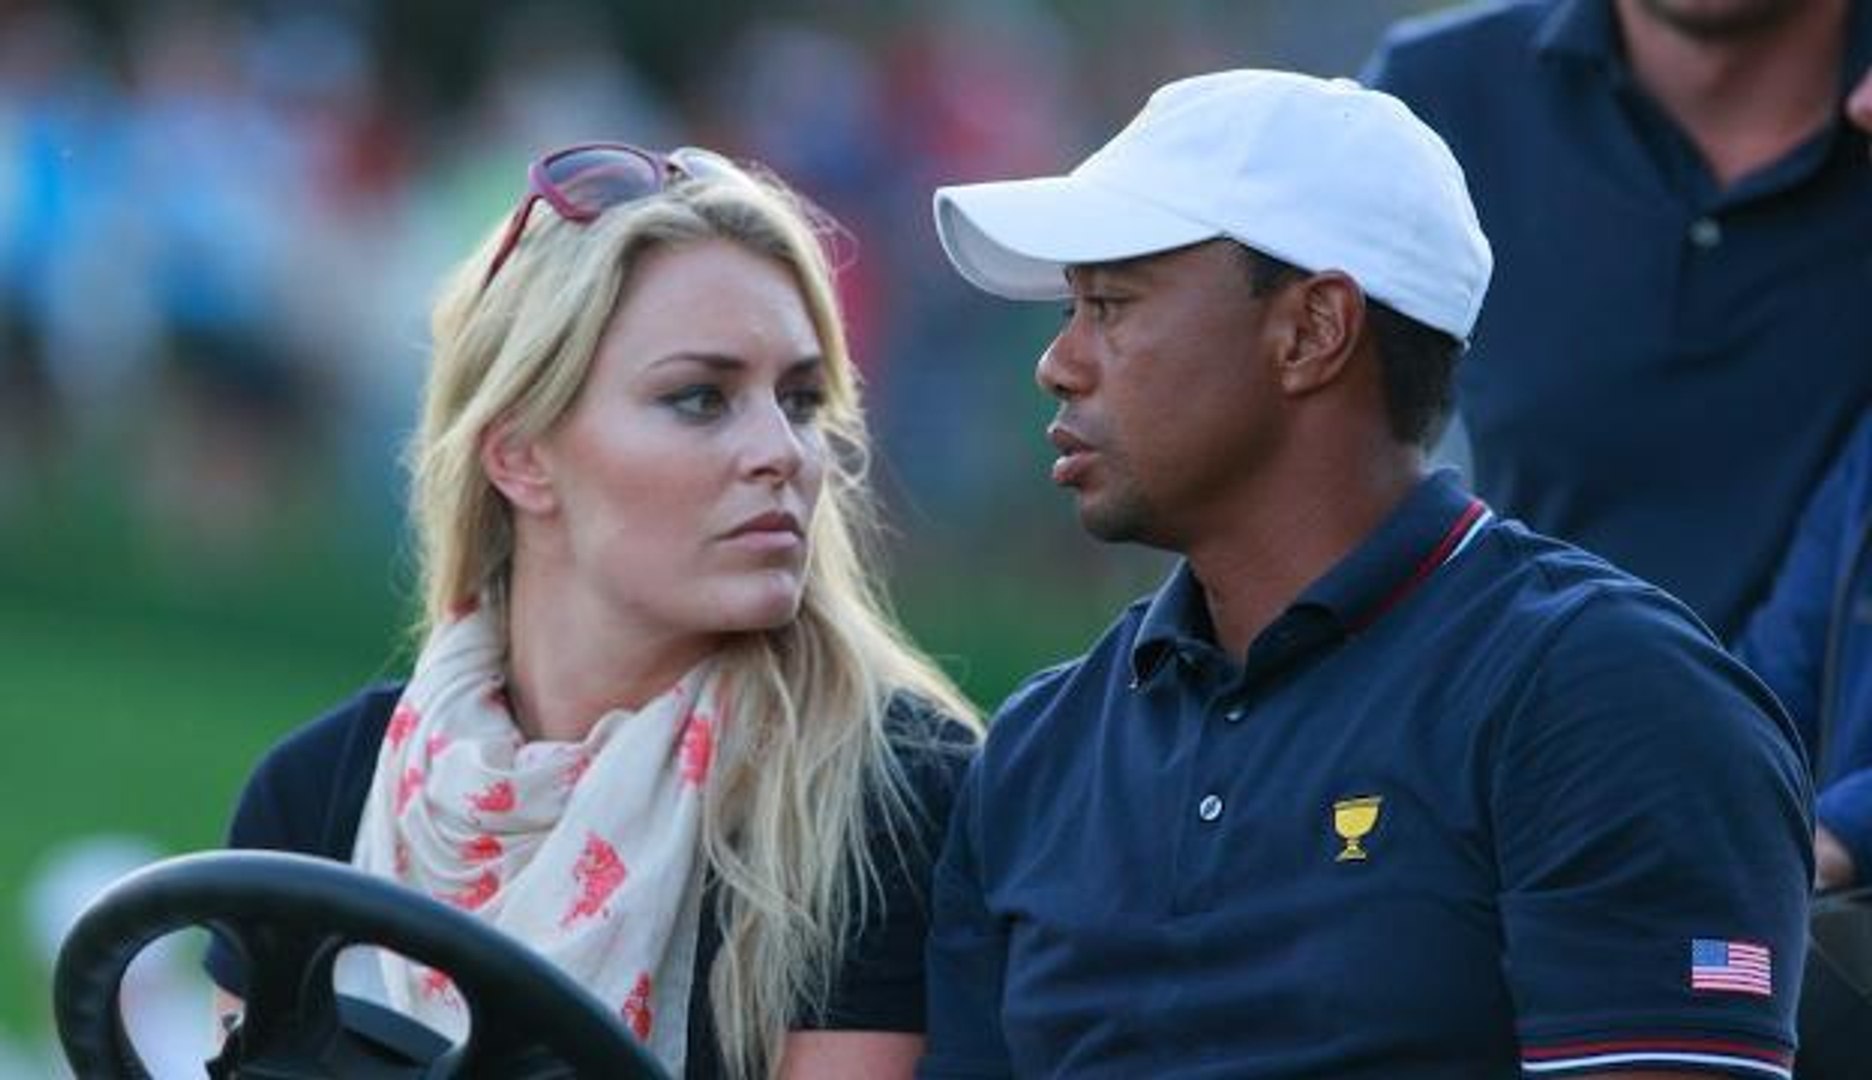 deandre wooley recommends lindsey vonn naked video pic